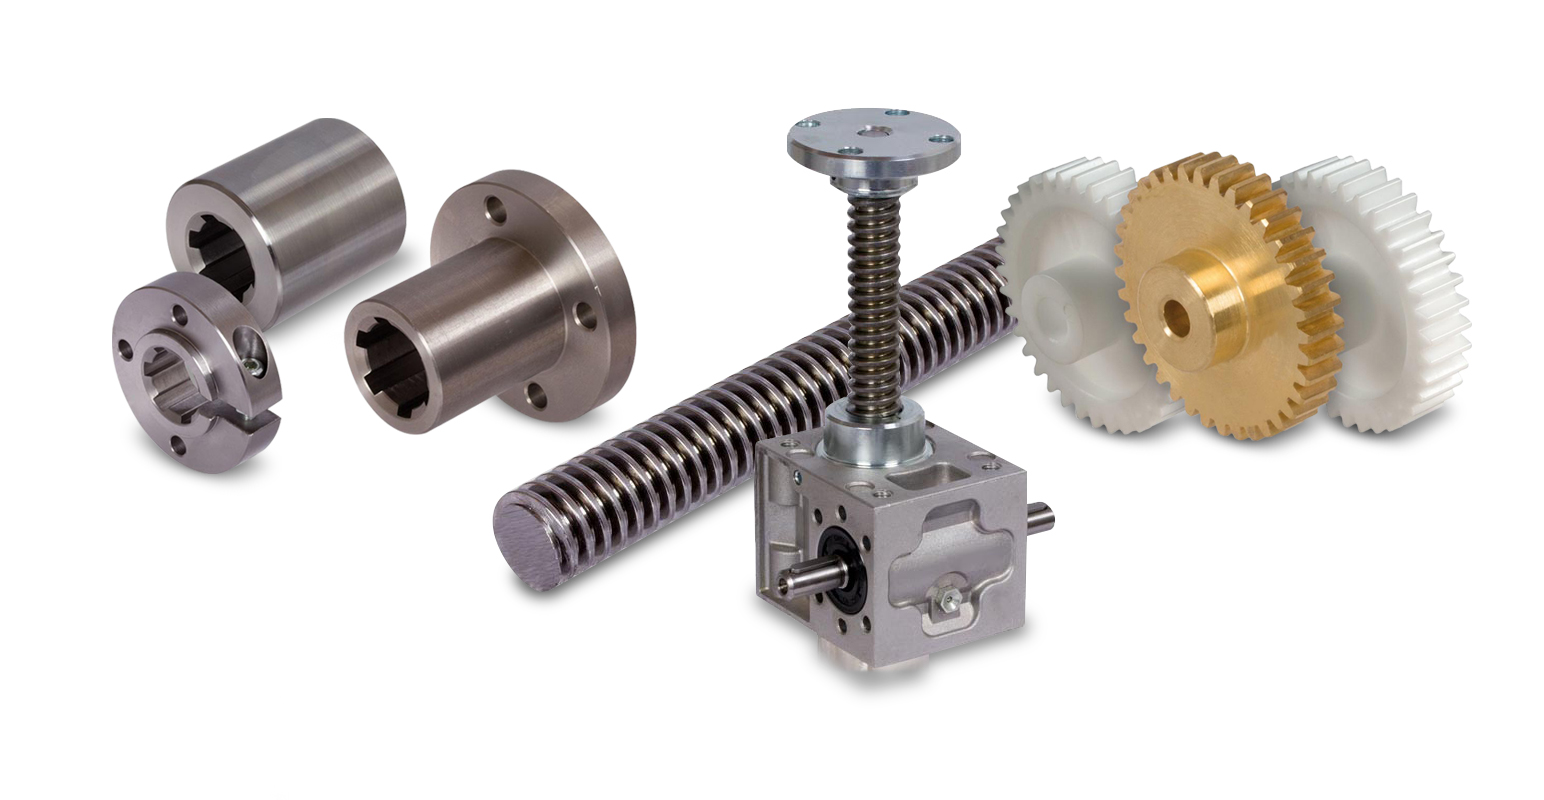 HucoDirect.com Now Offers Power Transmission Components for Fast, Free Delivery…Worldwide